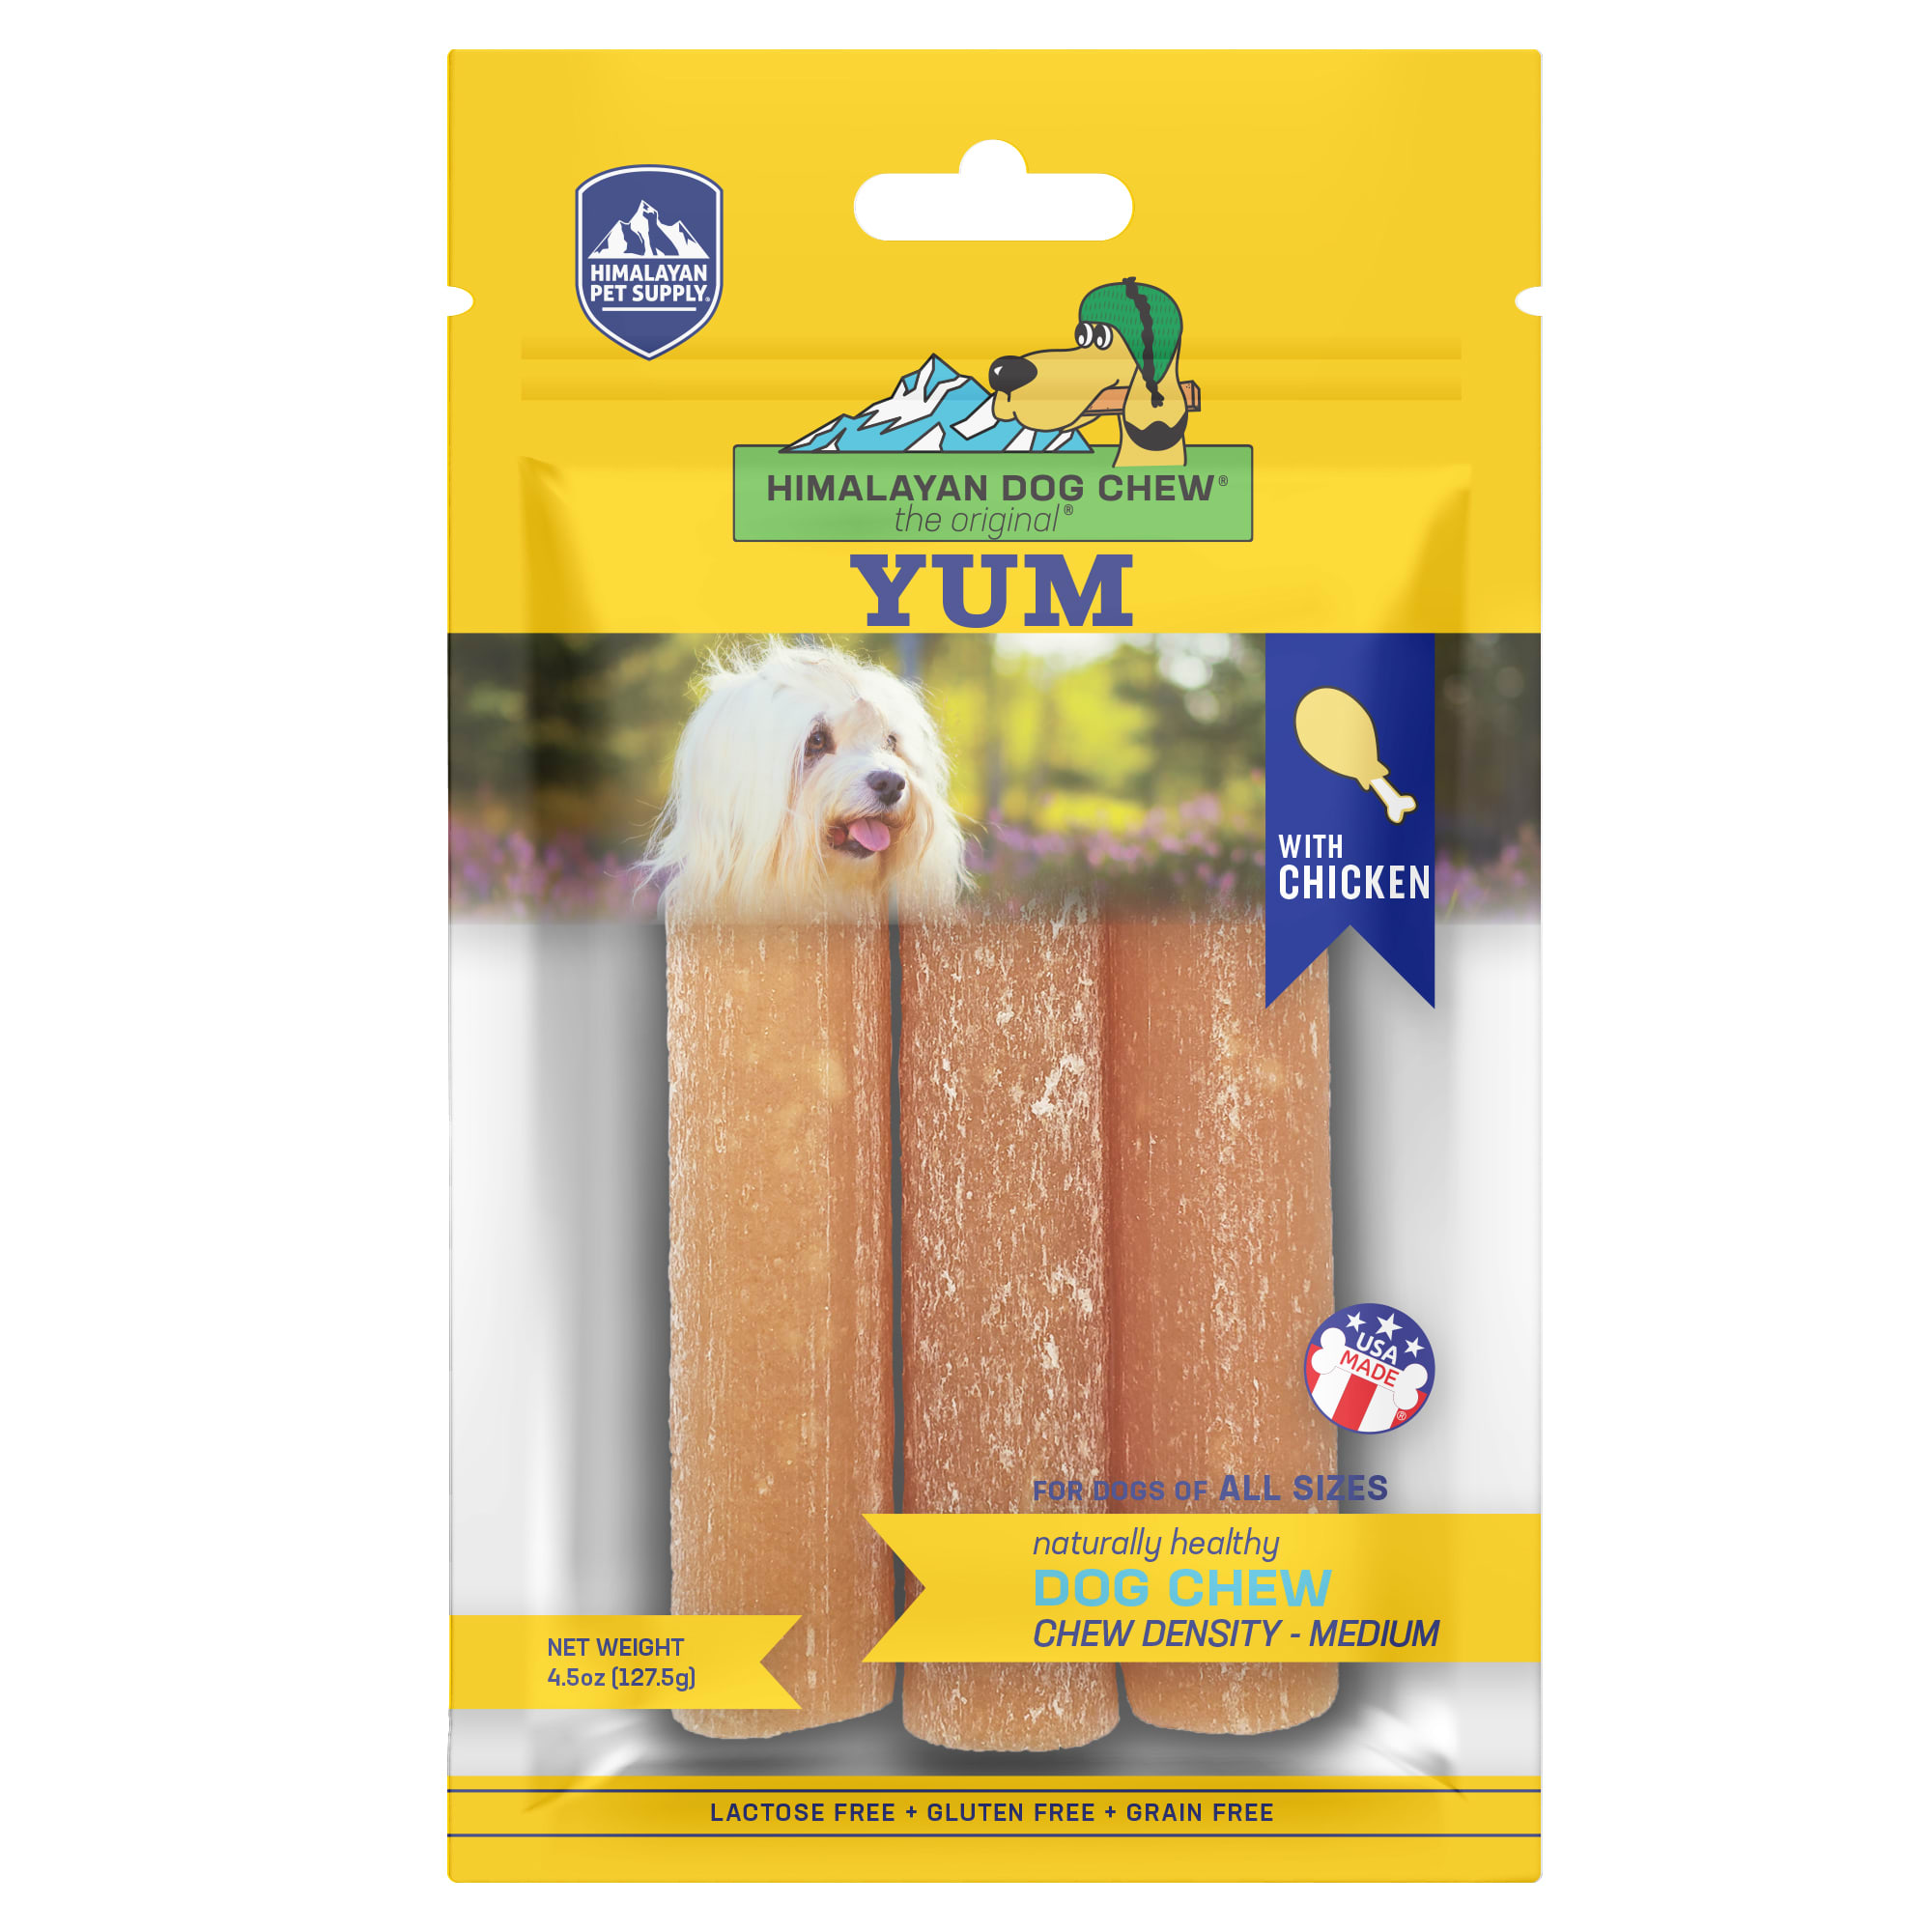 UPC 853012004791 product image for Himalayan Dog Chew YUM Chicken Treat, 4.5 oz., Count of 3 | upcitemdb.com